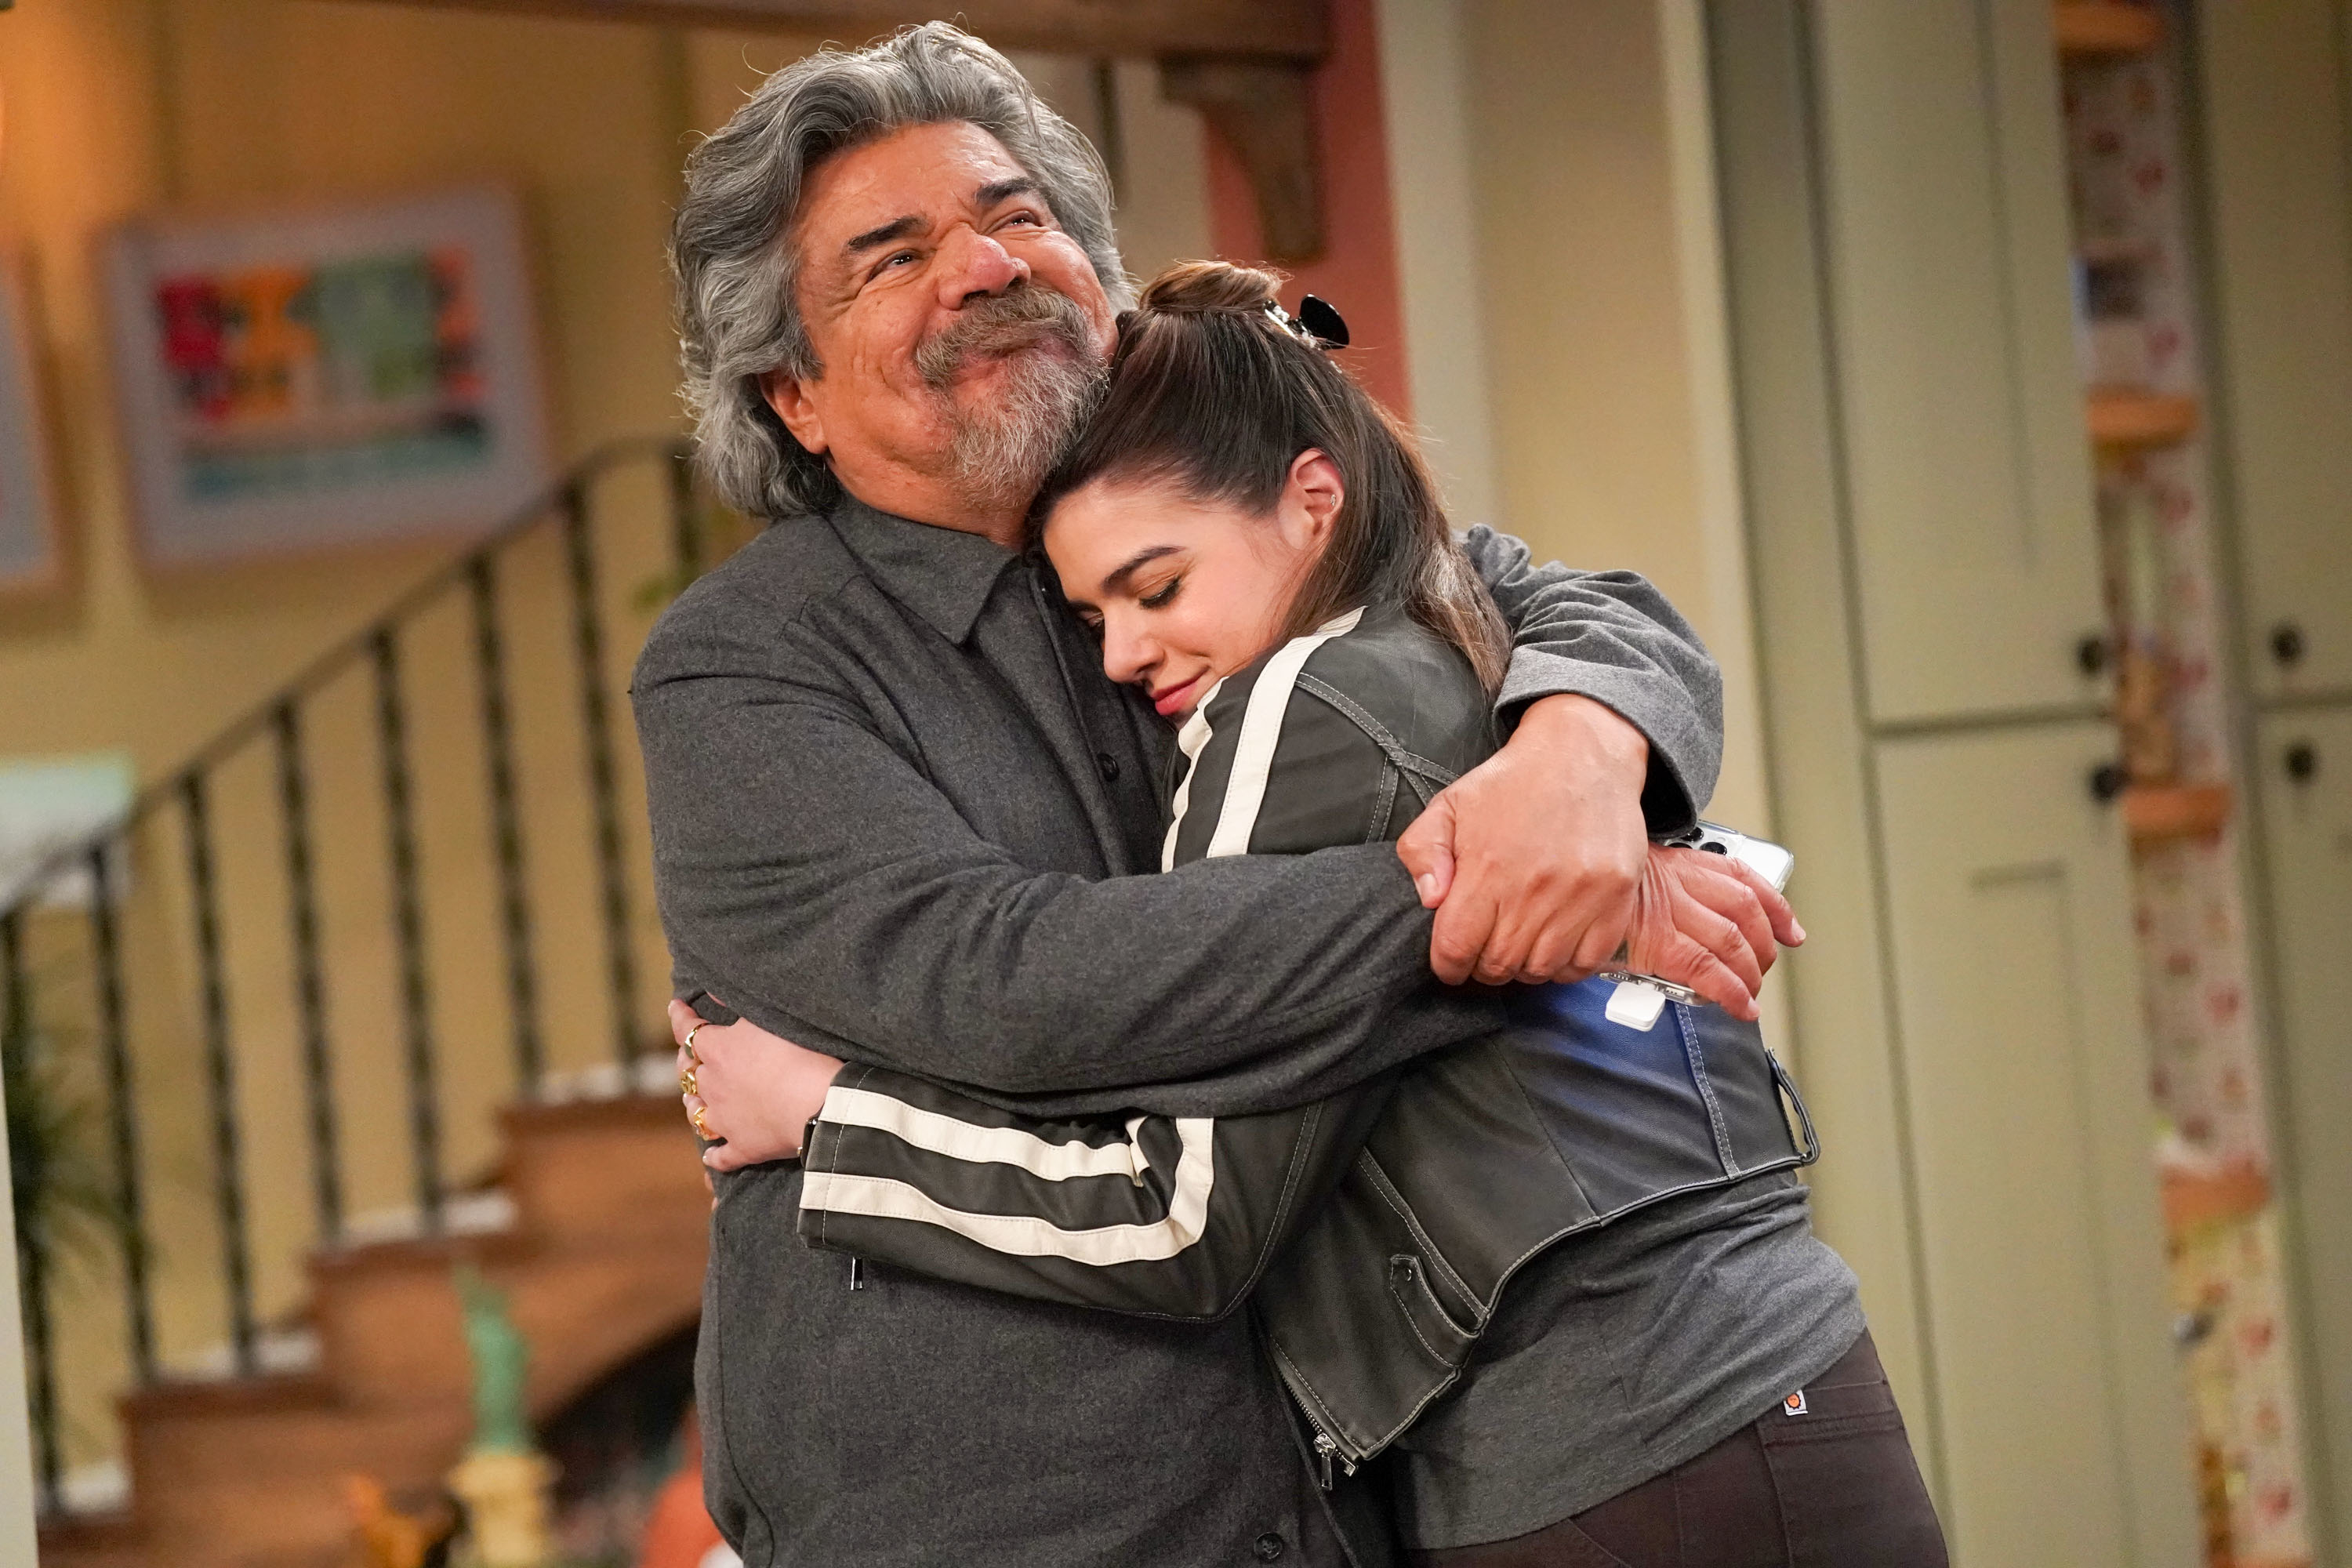 George Lopez and his on-screen granddaughter embrace warmly in a TV show scene